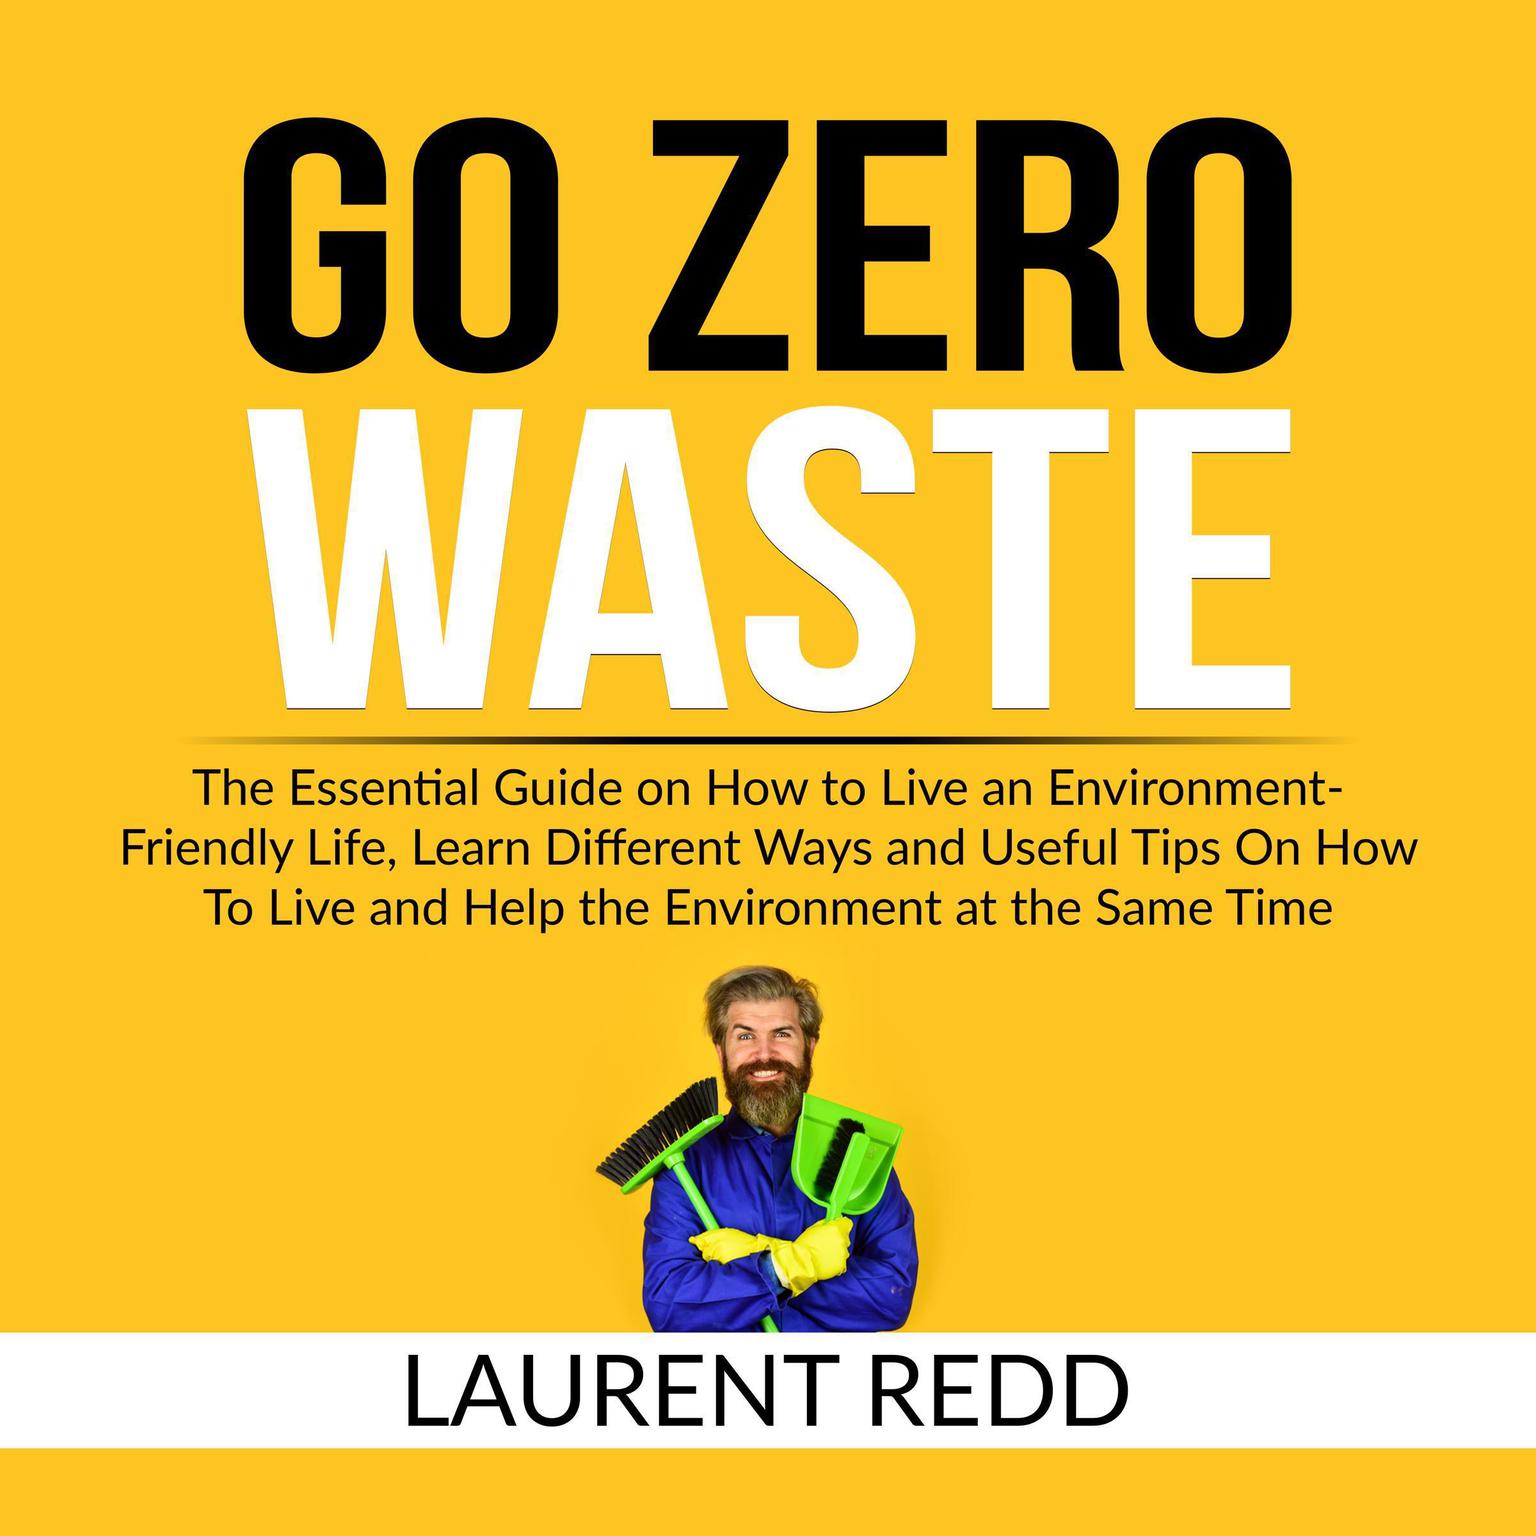 Go Zero Waste: The Essential Guide on How to Live an Environment-Friendly Life, Learn Different Ways and Useful Tips On How To Live and Help the Environment at the Same Time Audiobook, by Laurent Redd